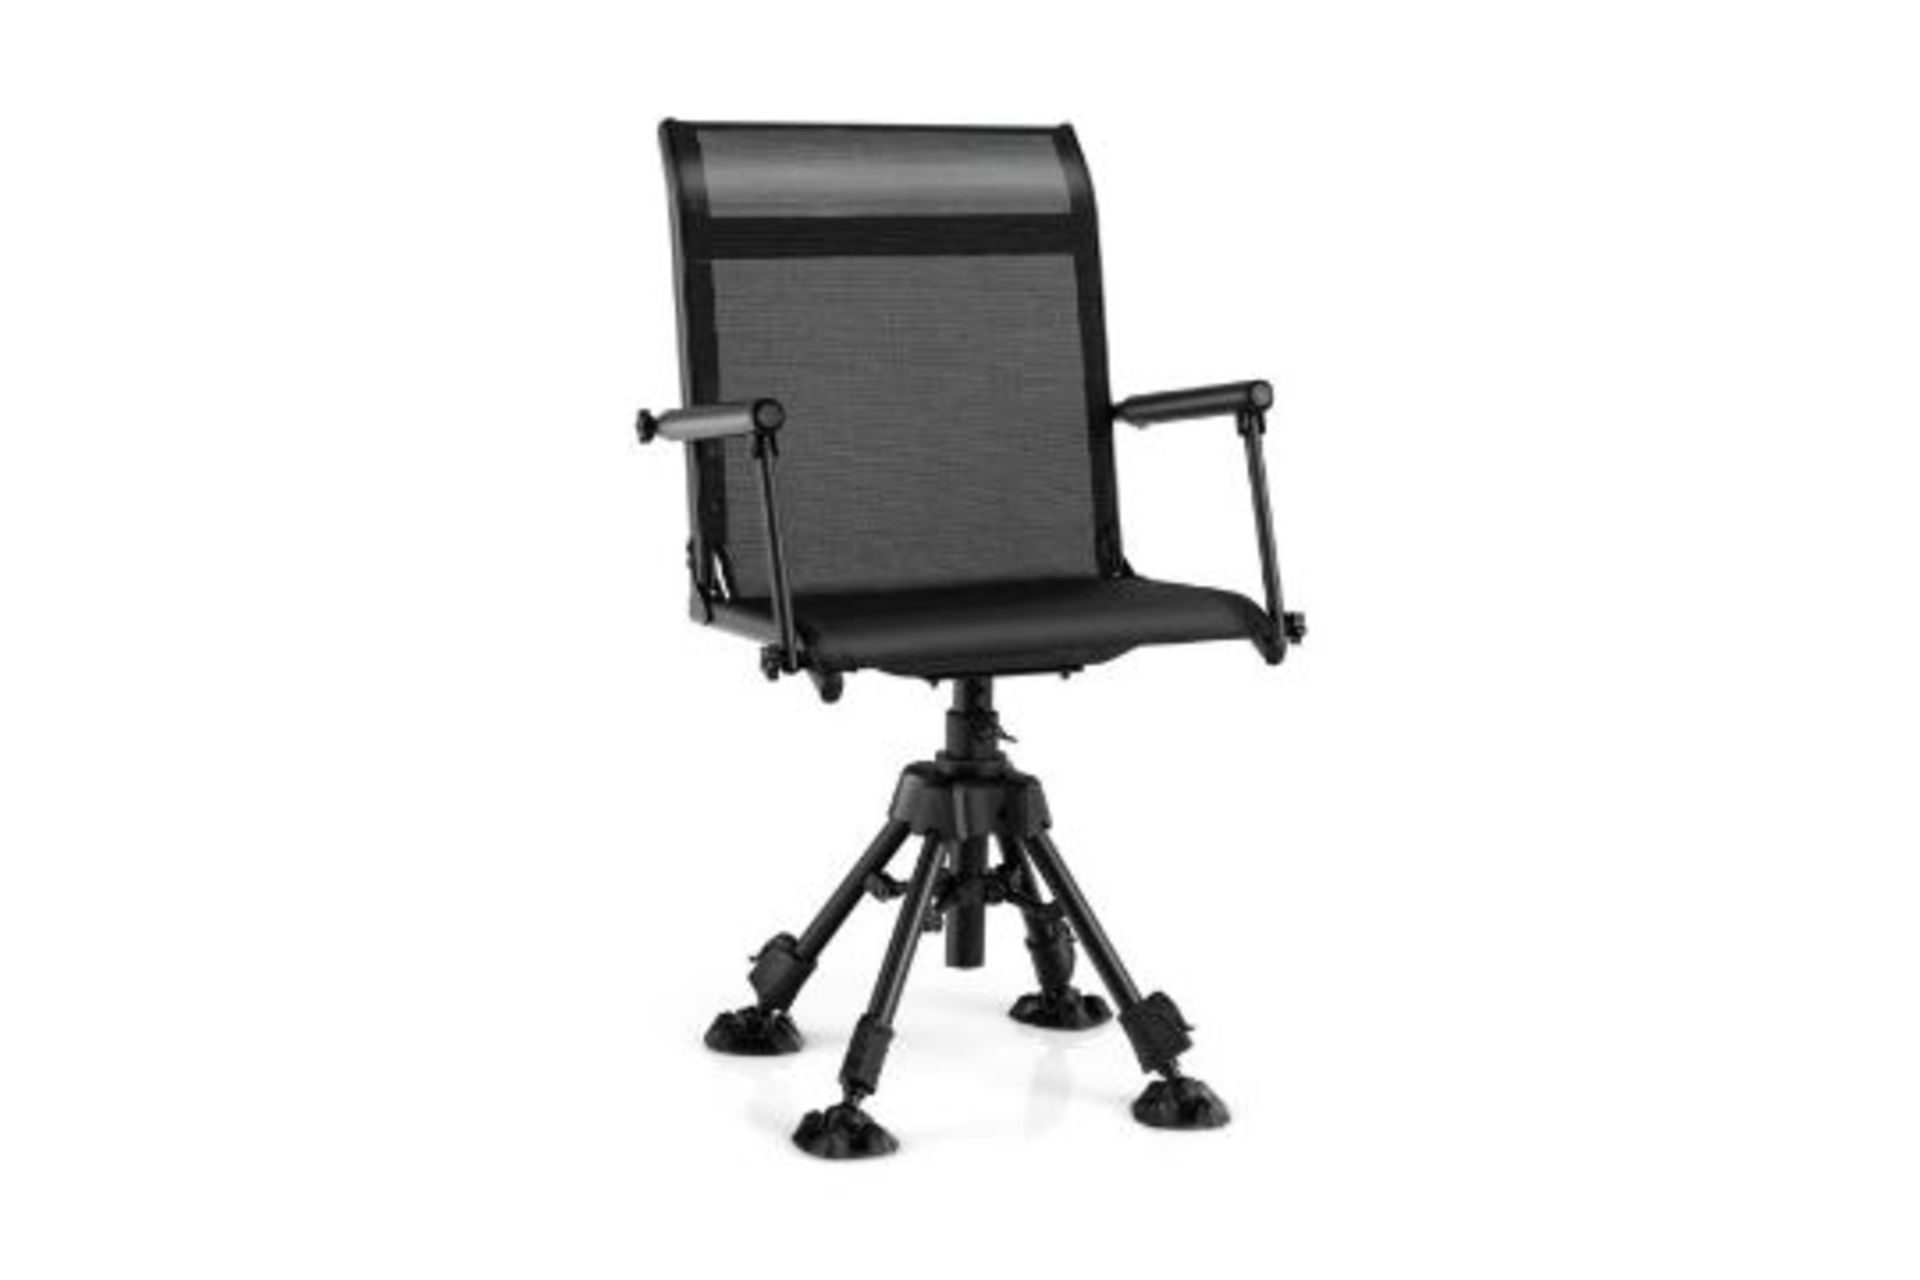 360° Swivel Hunting Chair with 4 Adjustable Legs. - R51